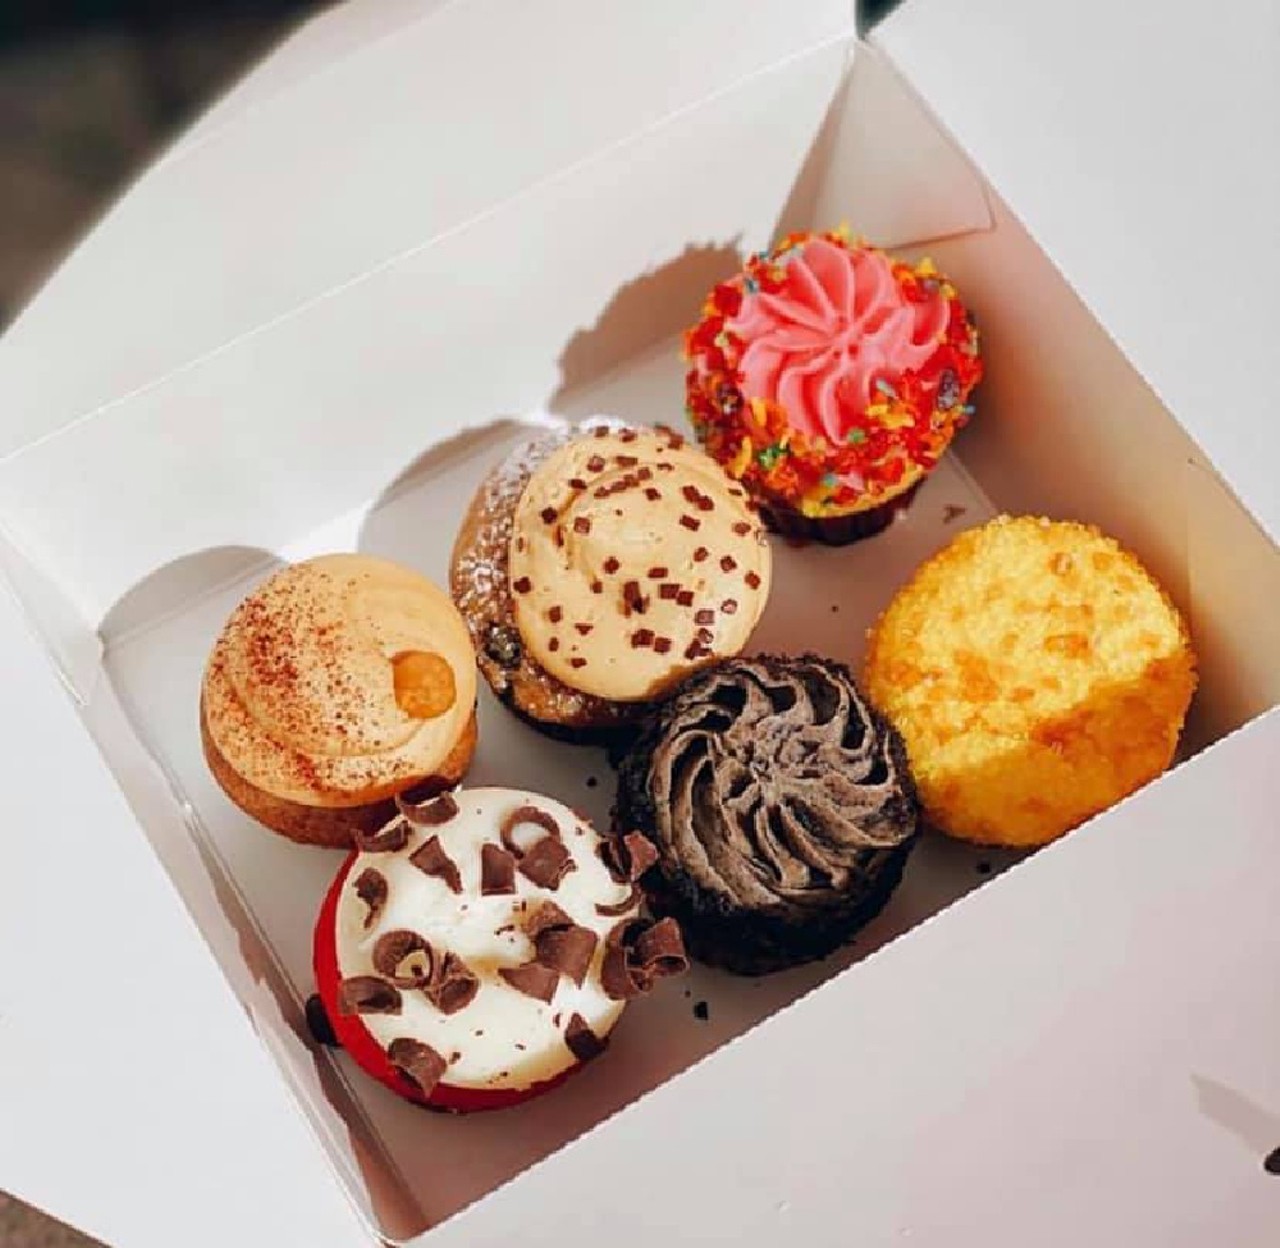 Sweet By Holly  
711 N. Alafaya Trail, 407-277-7746
&#148;I get cupcakes from this place pretty regularly and have never had a problem.  The cupcakes are always top notch (especially the minis), and the service is always excellent.&#148; - Tom E.
Photo via  Sweet By Holly/Facebook